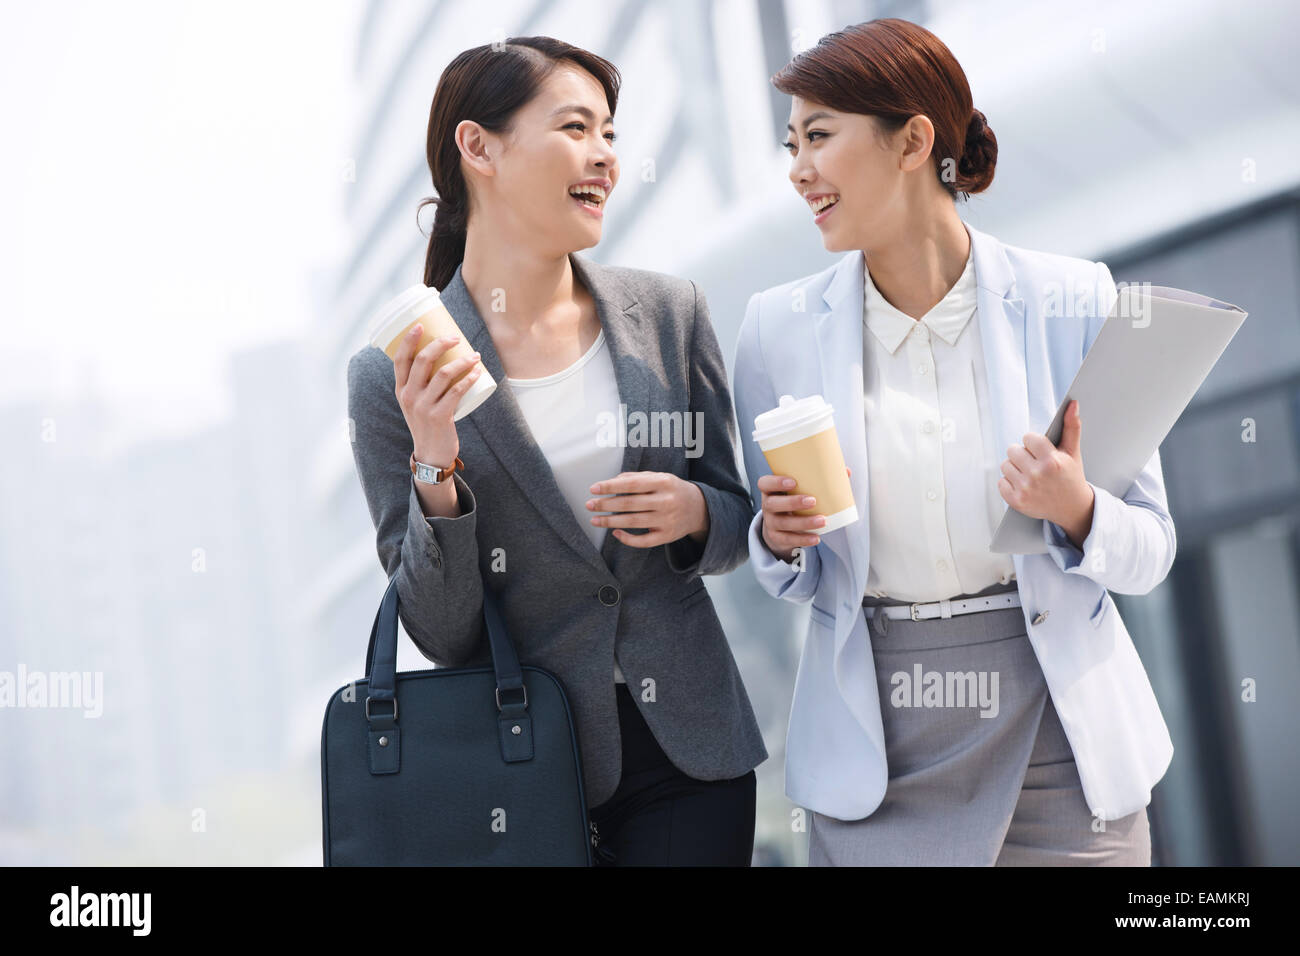 Two business lady holding a coffee cup on the way to work Stock Photo